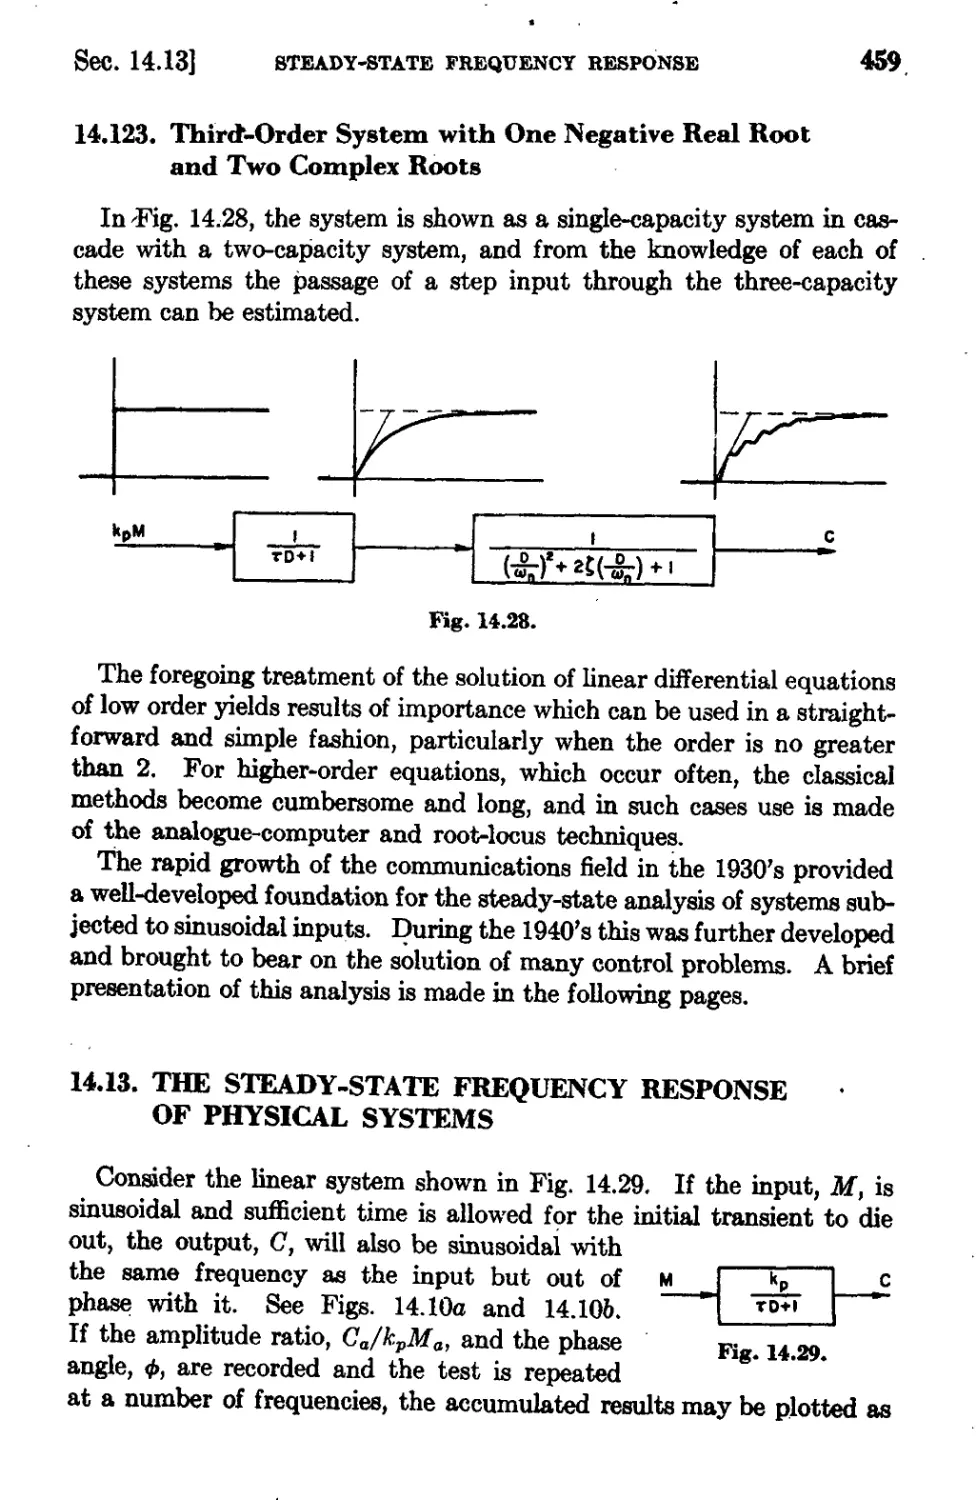 14.13 The Steady-State Frequency Response of Physical Systems